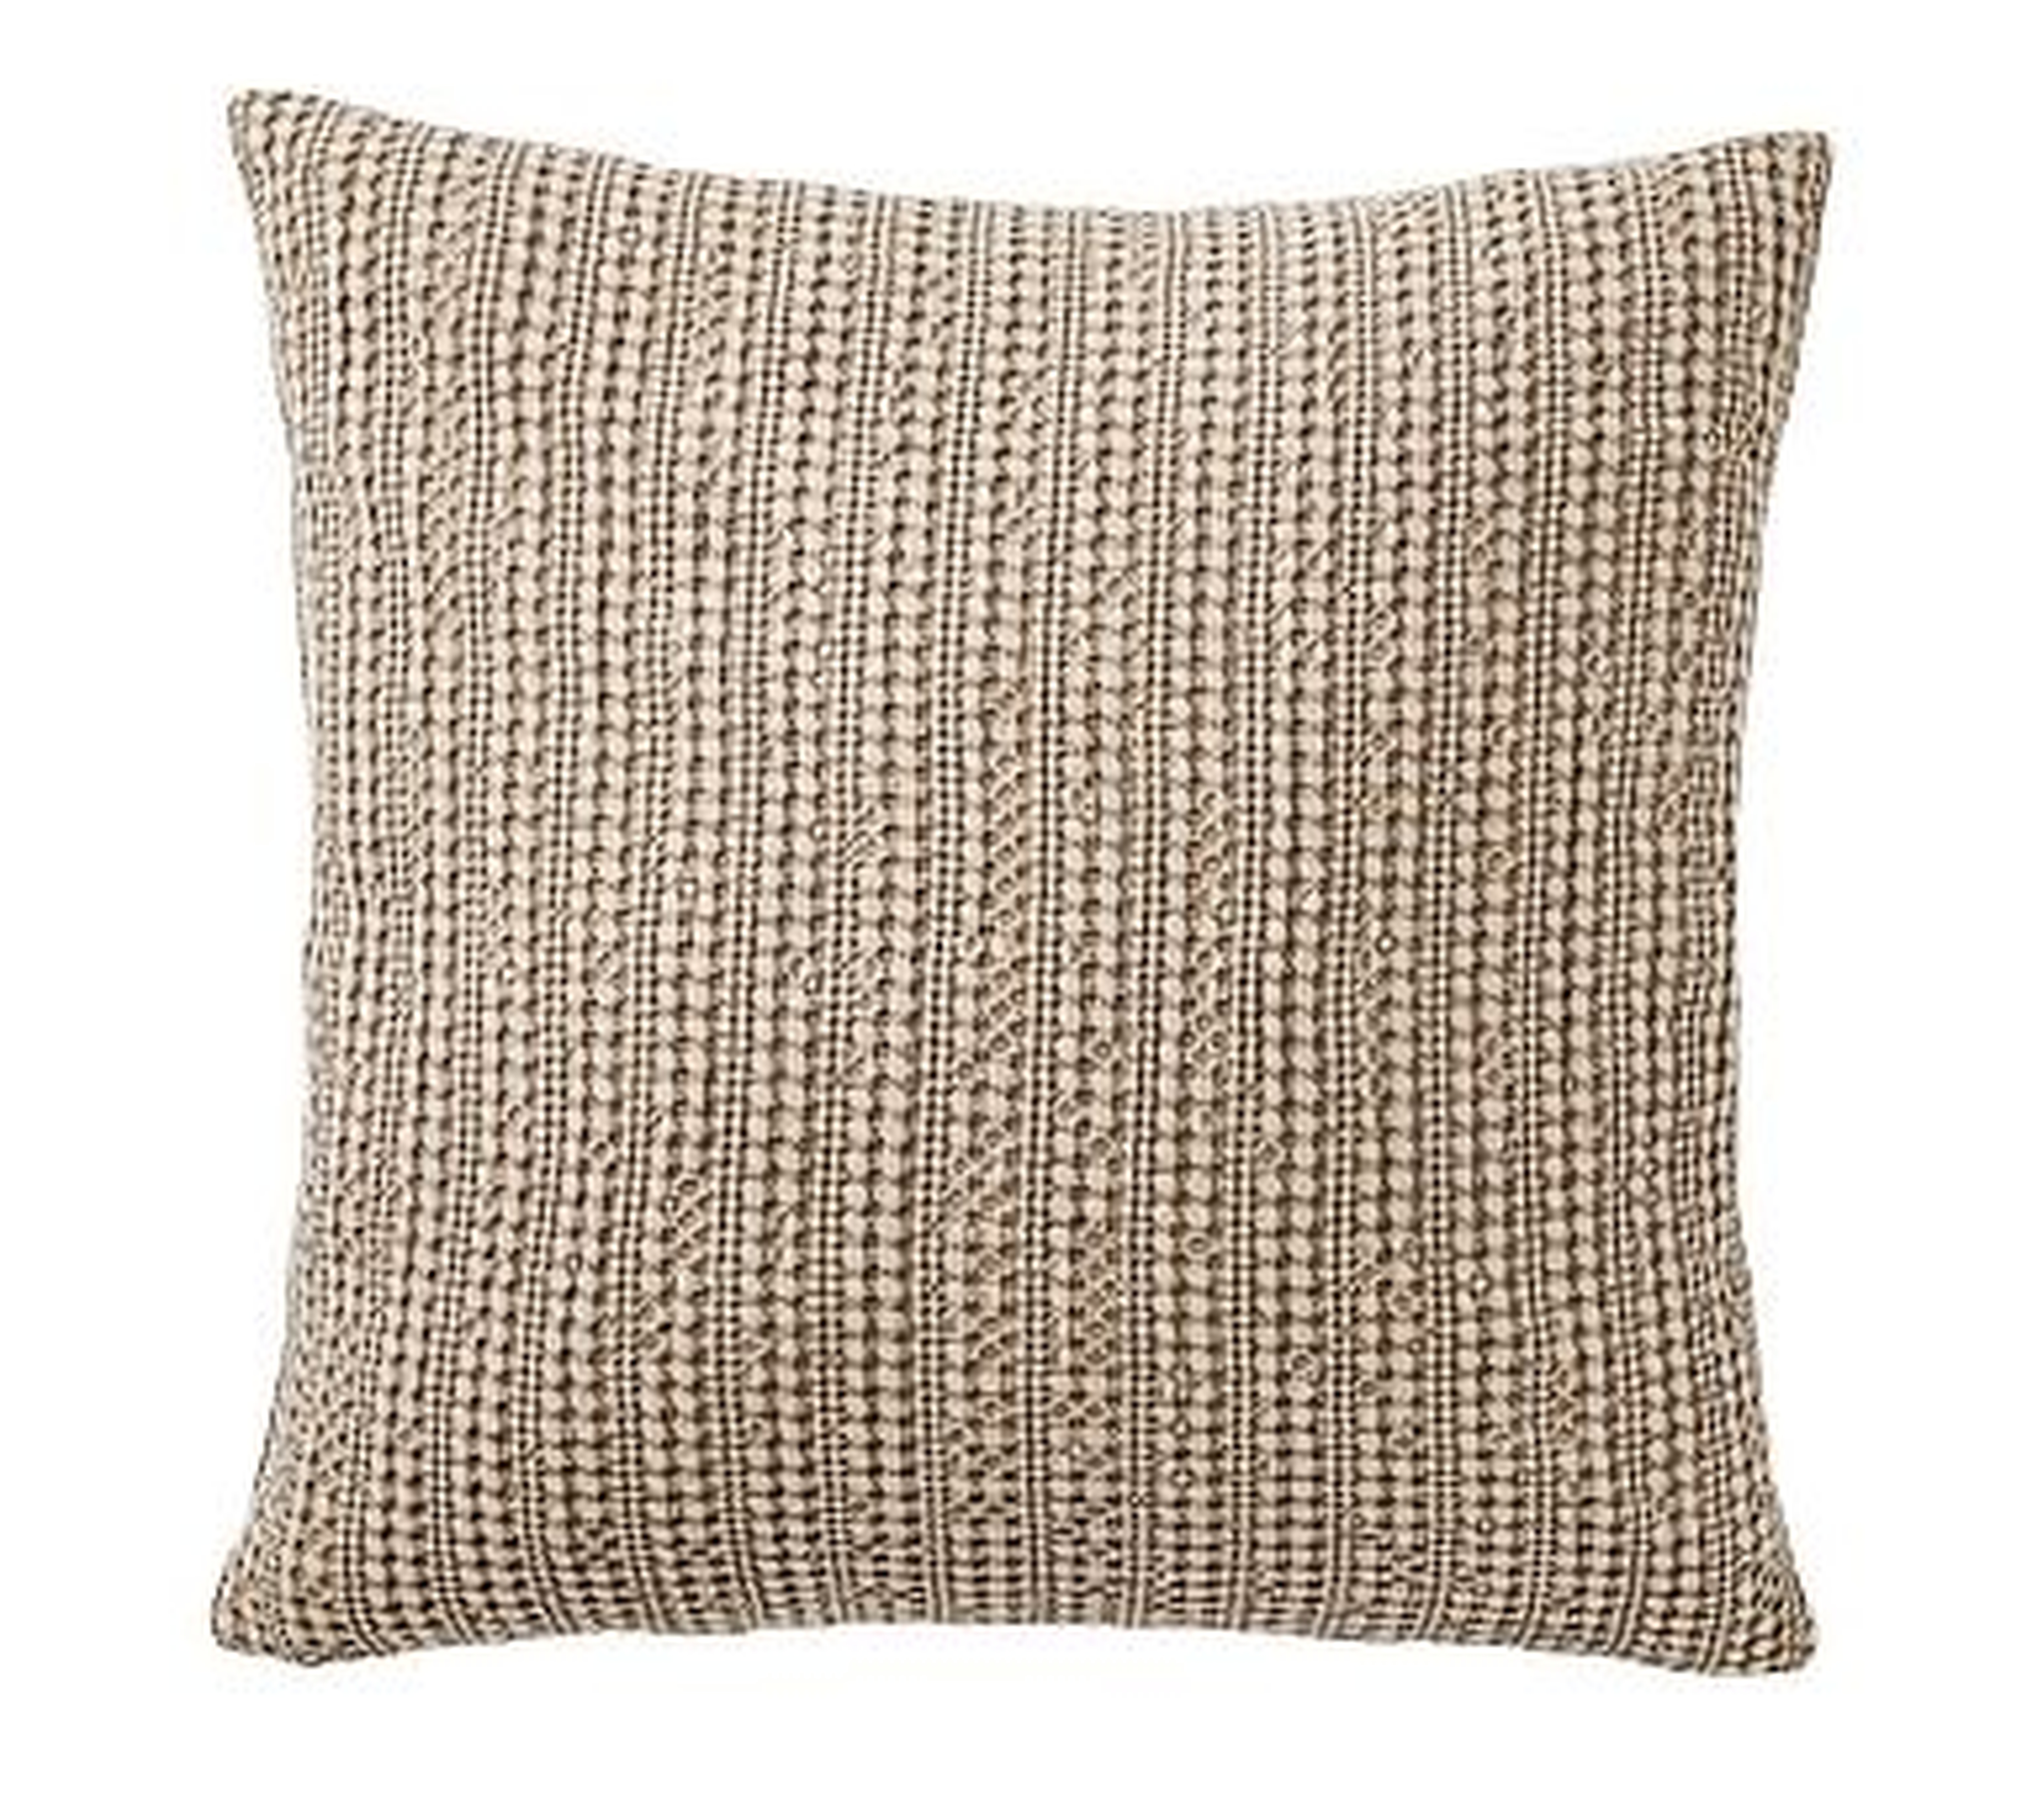 Honeycomb Pillow Cover, 18", Driftwood - Pottery Barn